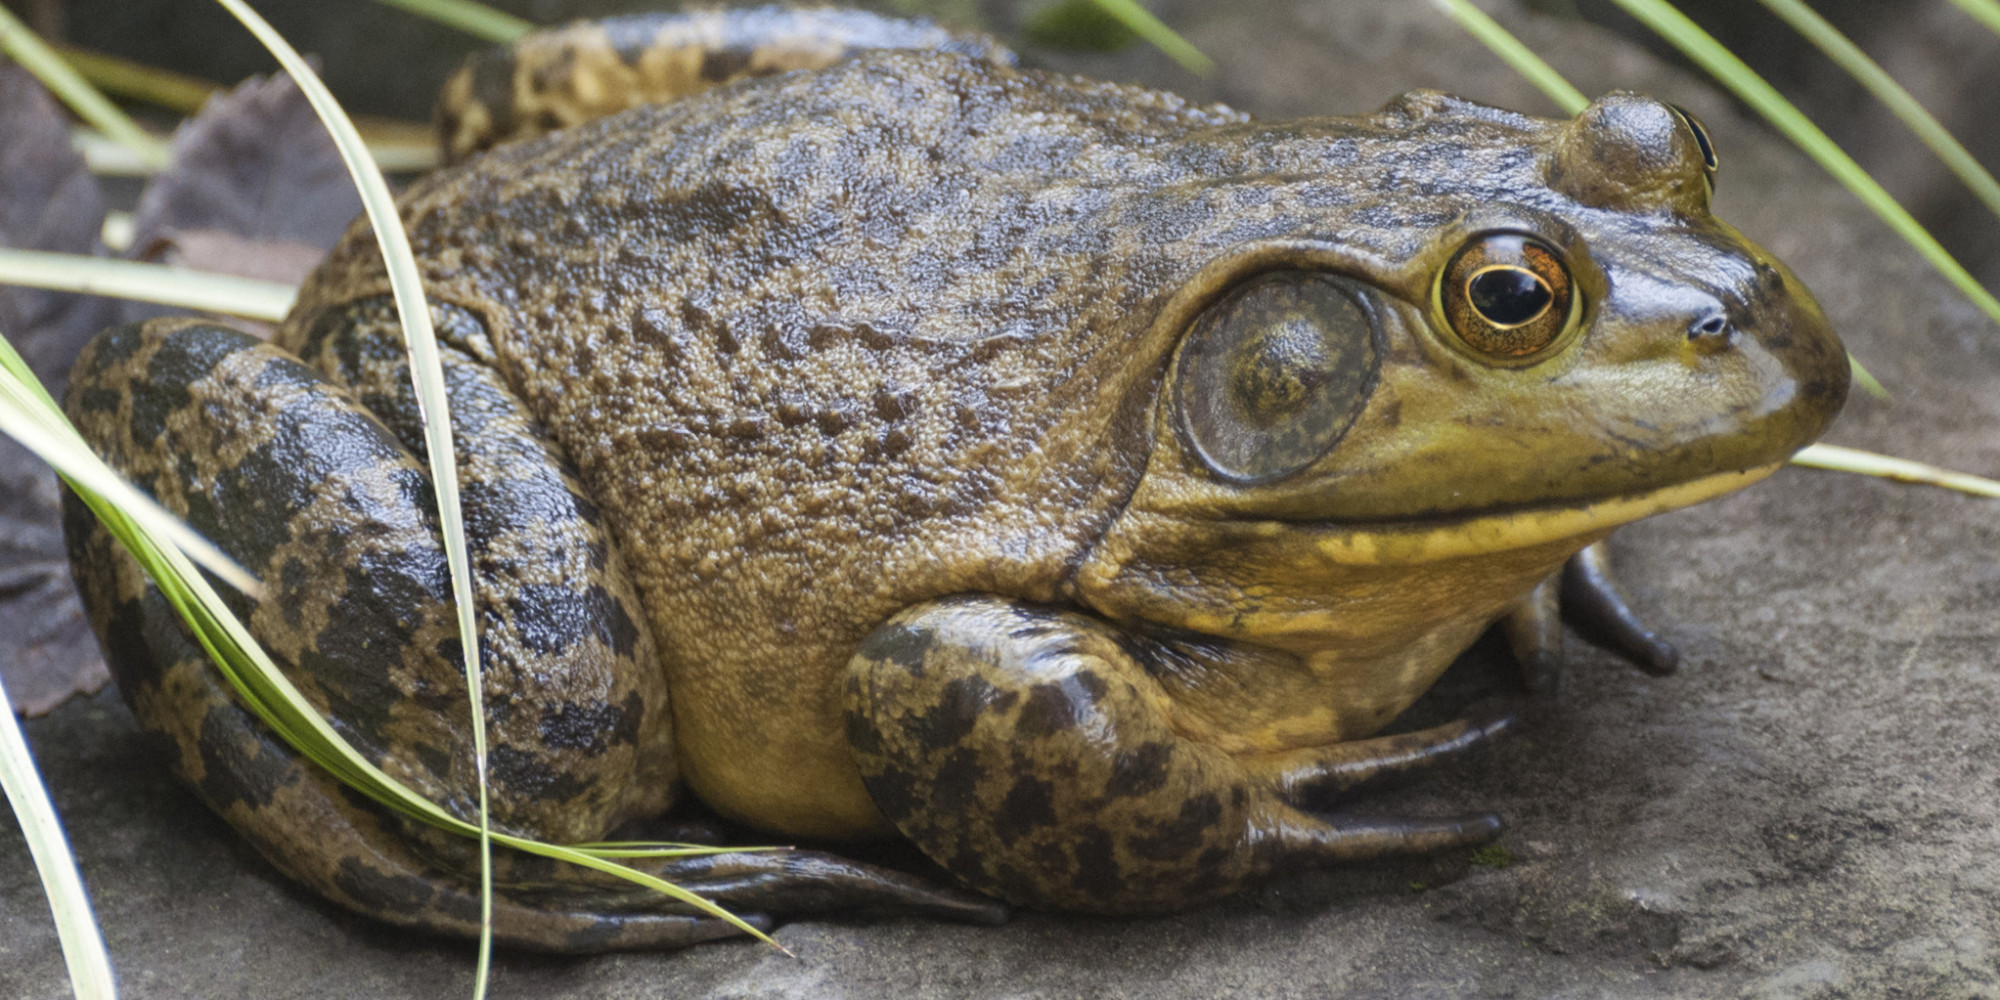 eat-the-enemy-how-to-fight-the-bullfrog-invasion-with-your-tastebuds